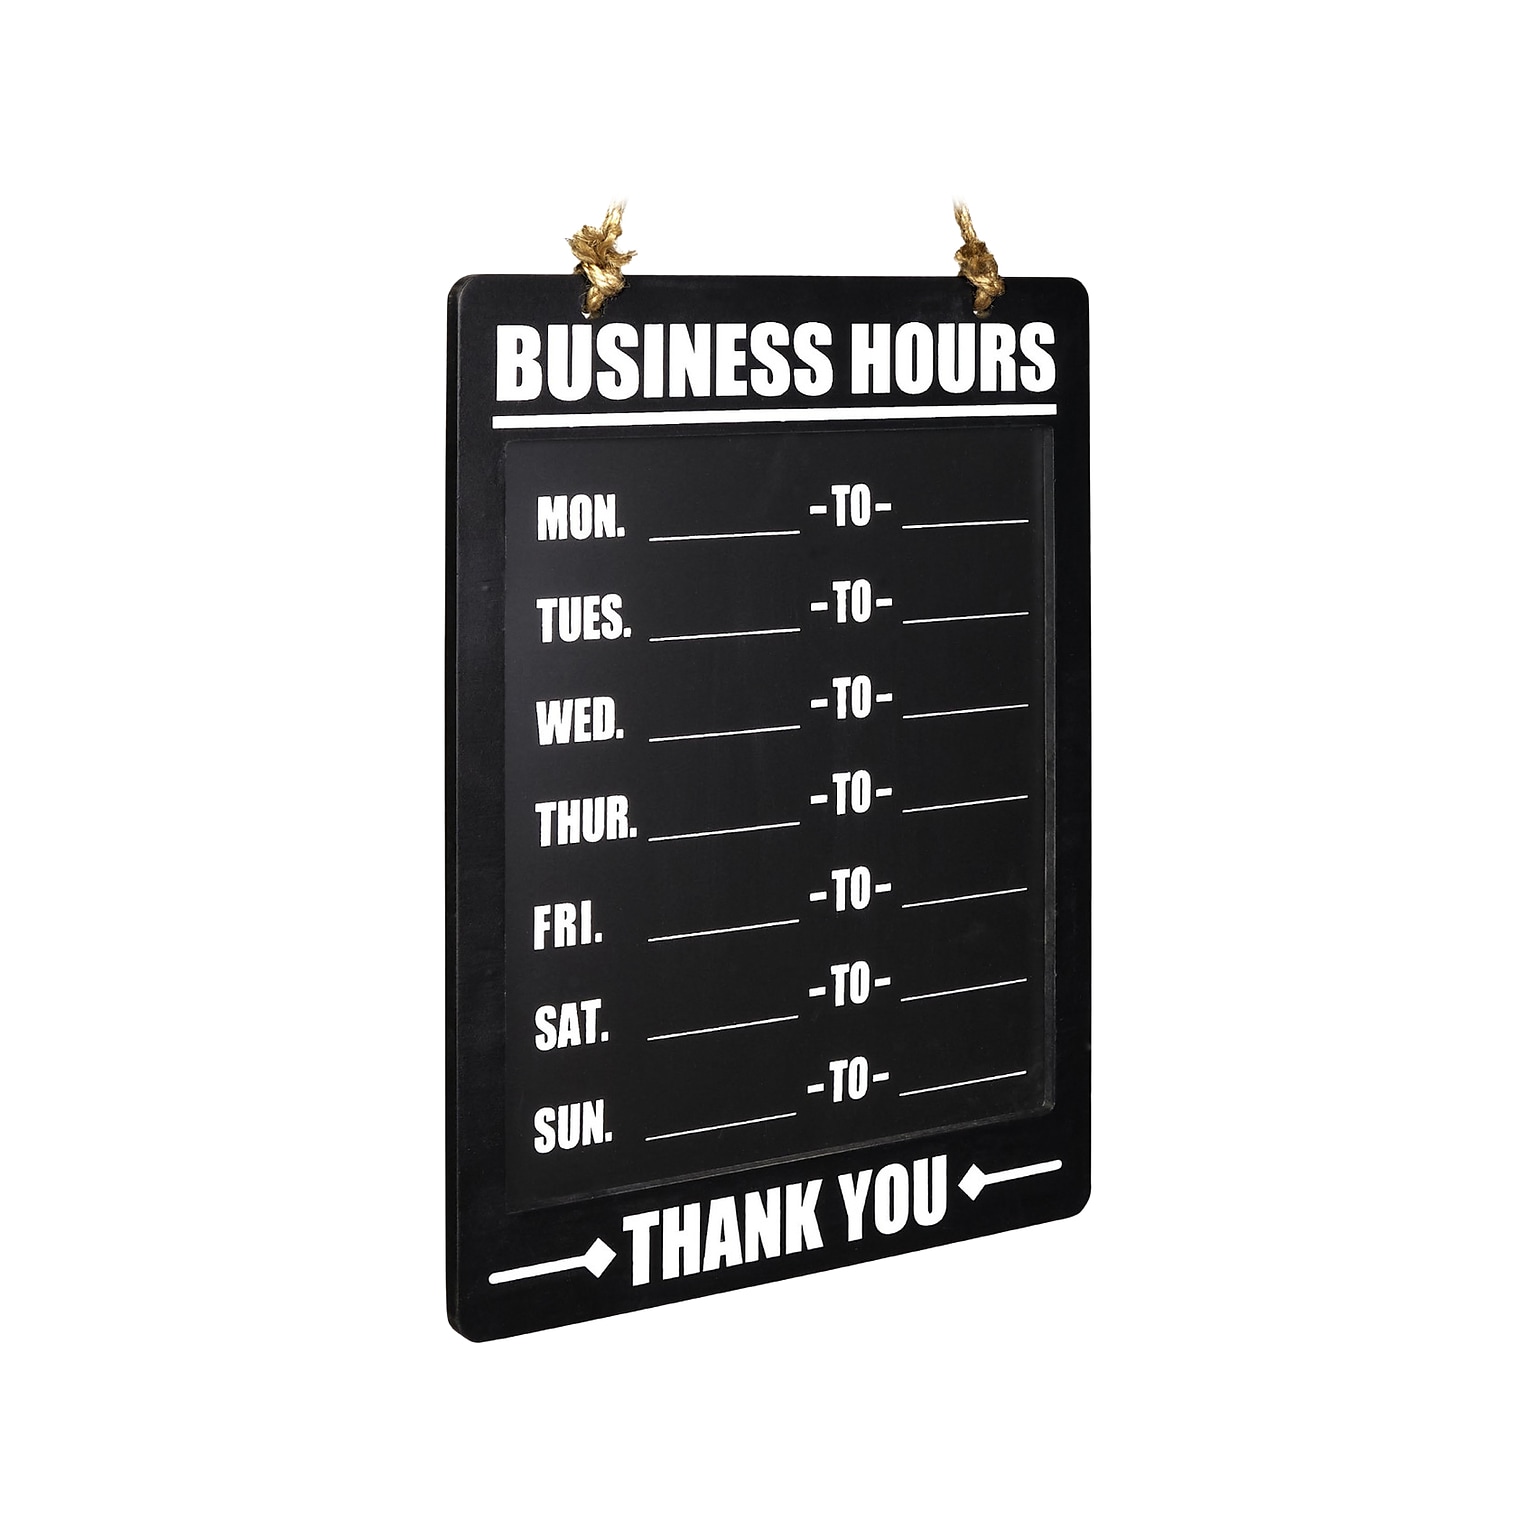 Excello Global Products Business Hours Indoor/Outdoor Hanging Chalkboard, 10 x 13.75, Black (EGP-HD-0311A-S)